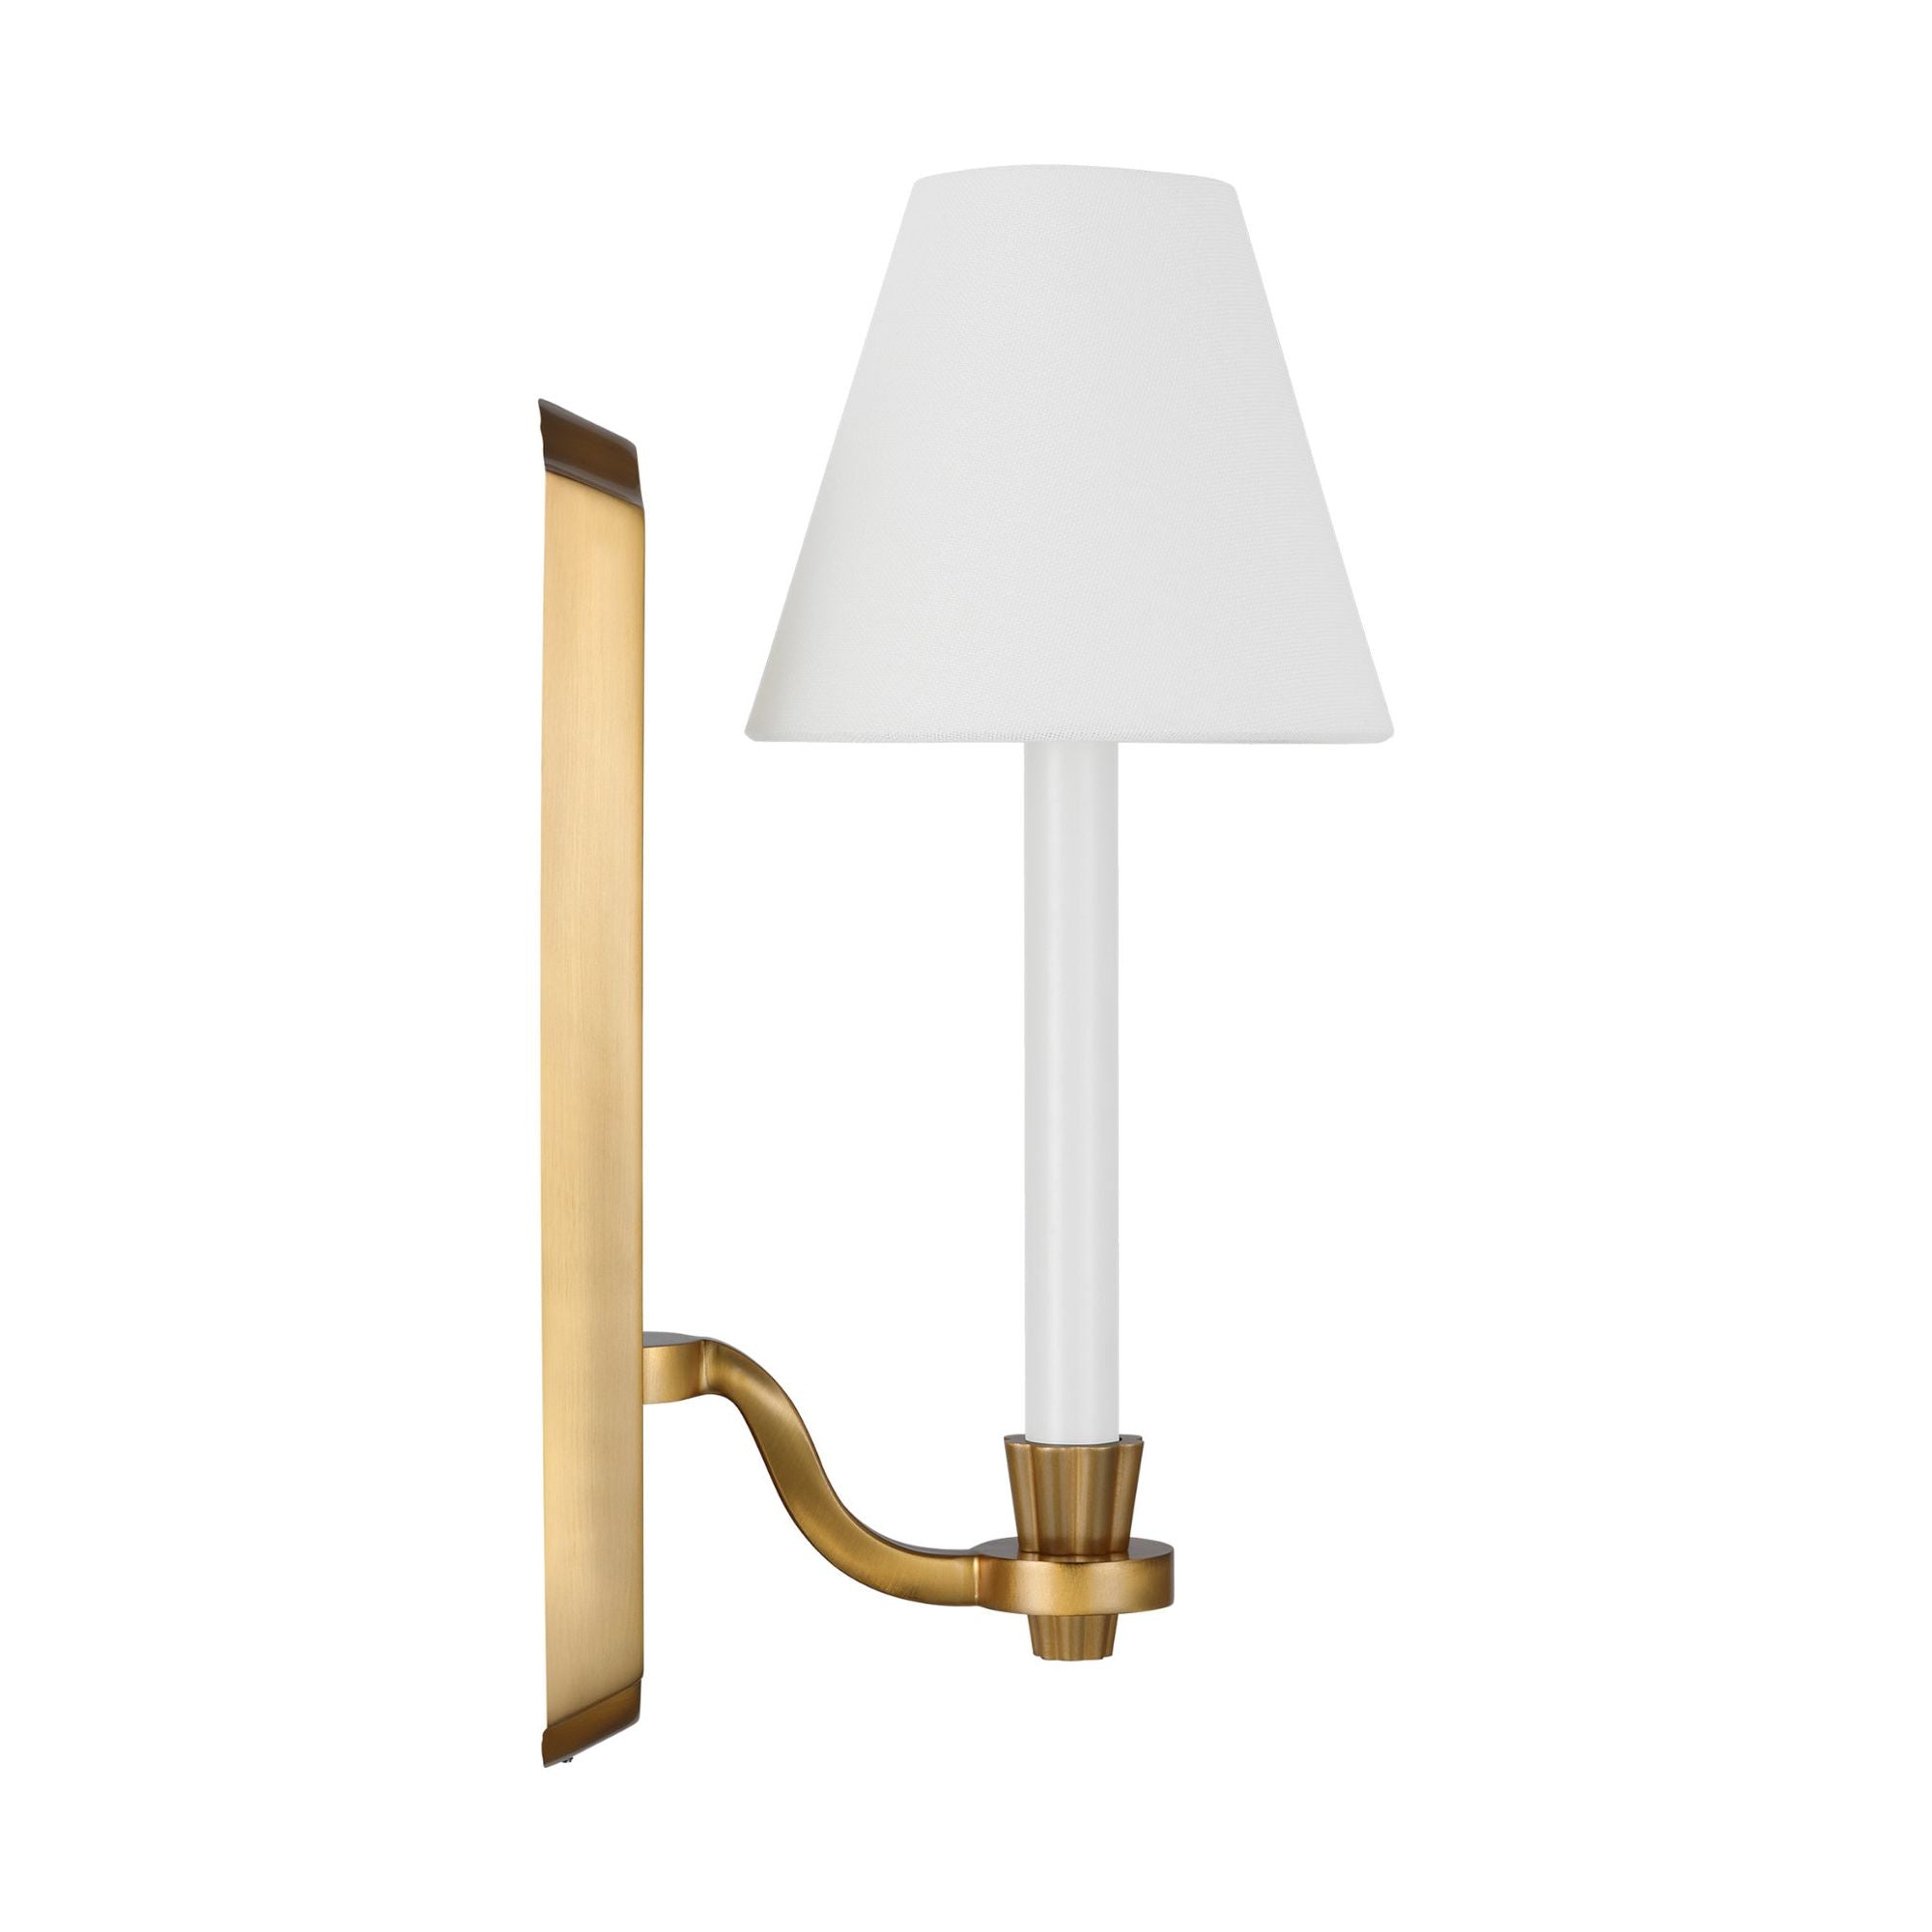 Alexa Hampton Paisley Tall Sconce in Burnished Brass